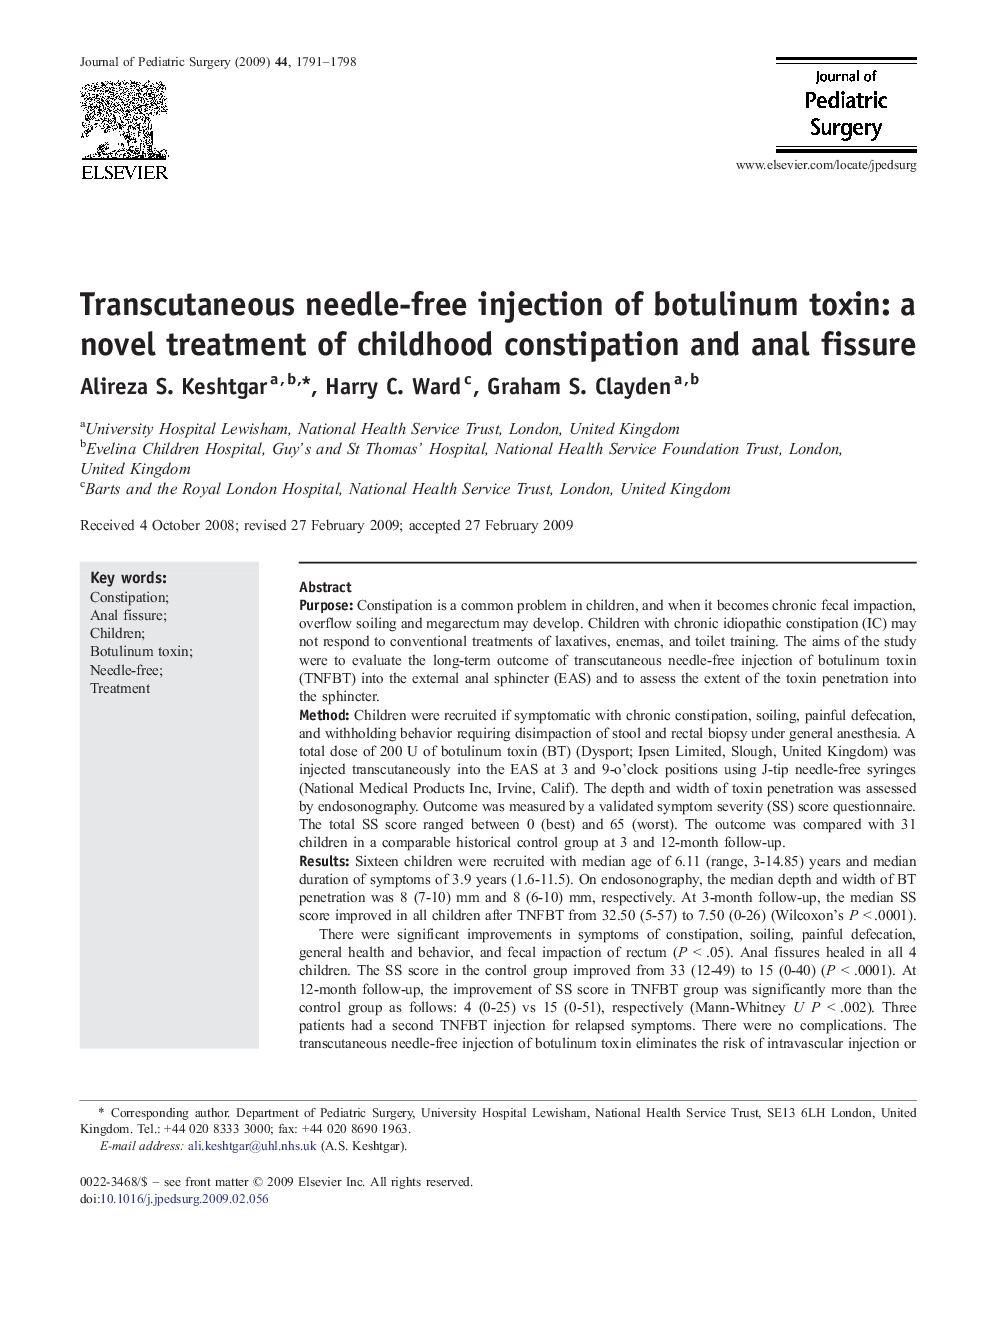 Transcutaneous needle-free injection of botulinum toxin: a novel treatment of childhood constipation and anal fissure